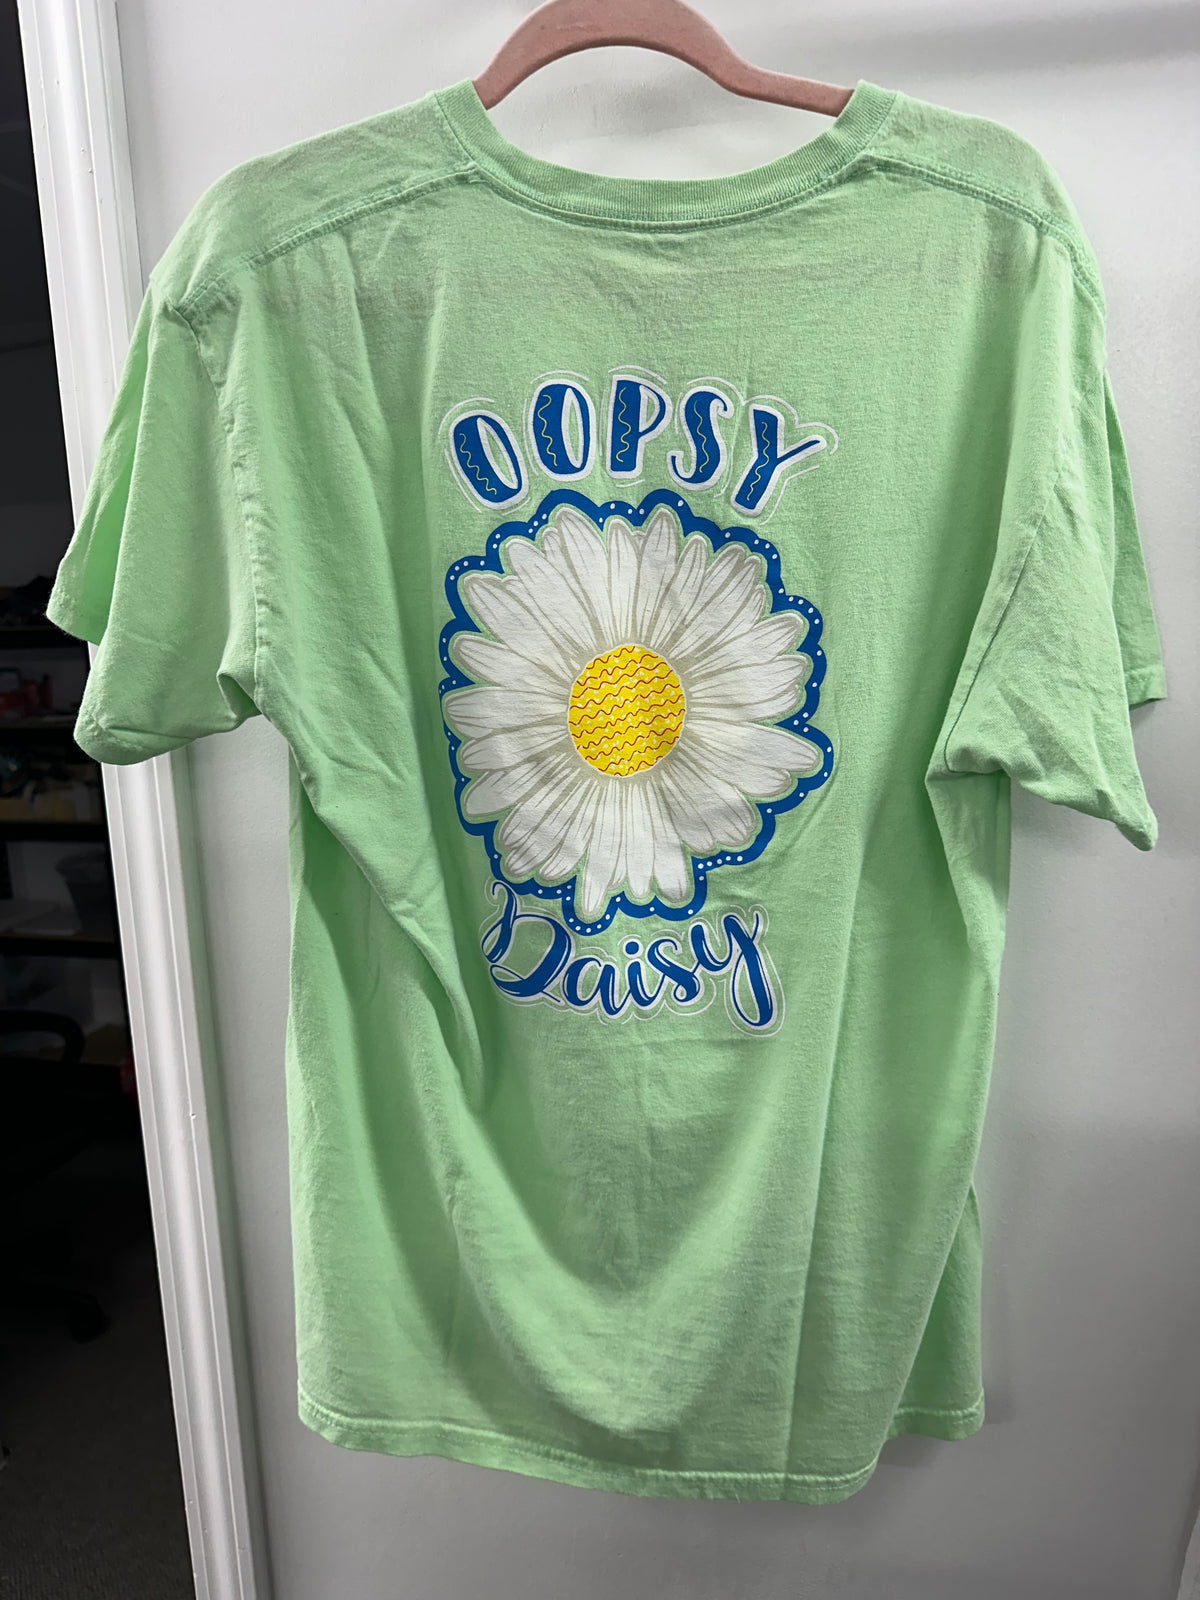 Oopsy Daisy Green Tee        Large        (011)